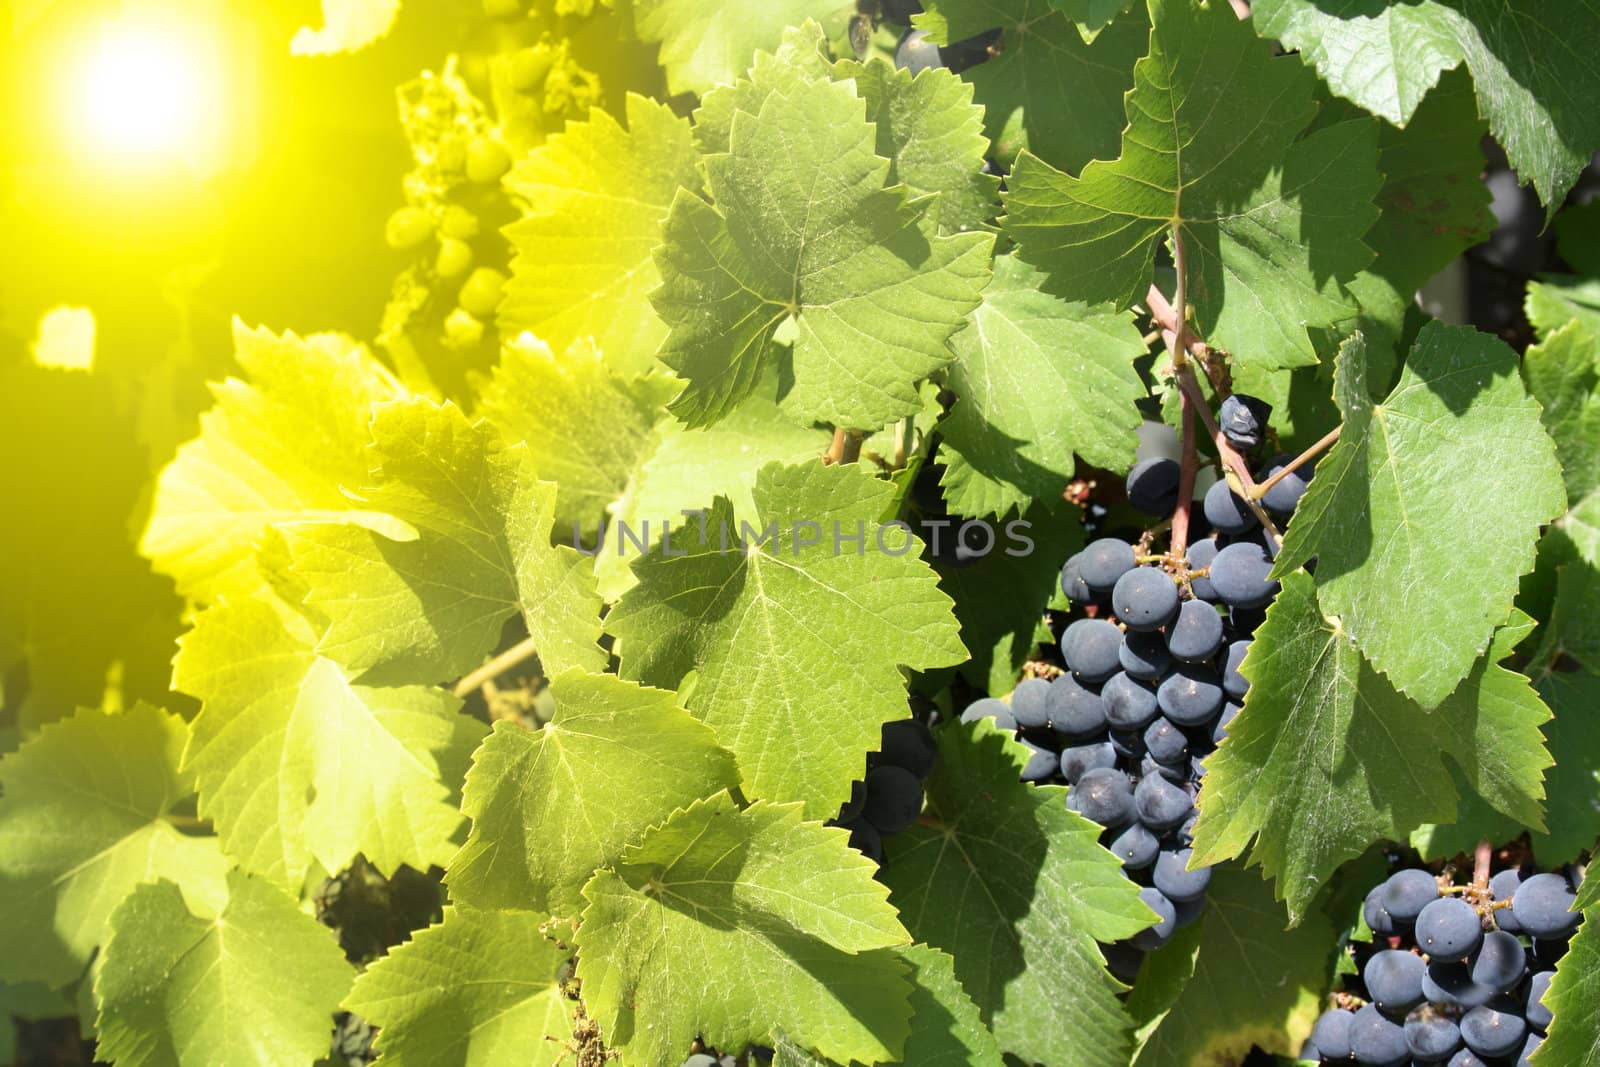 green leaves and blue grapes by photochecker